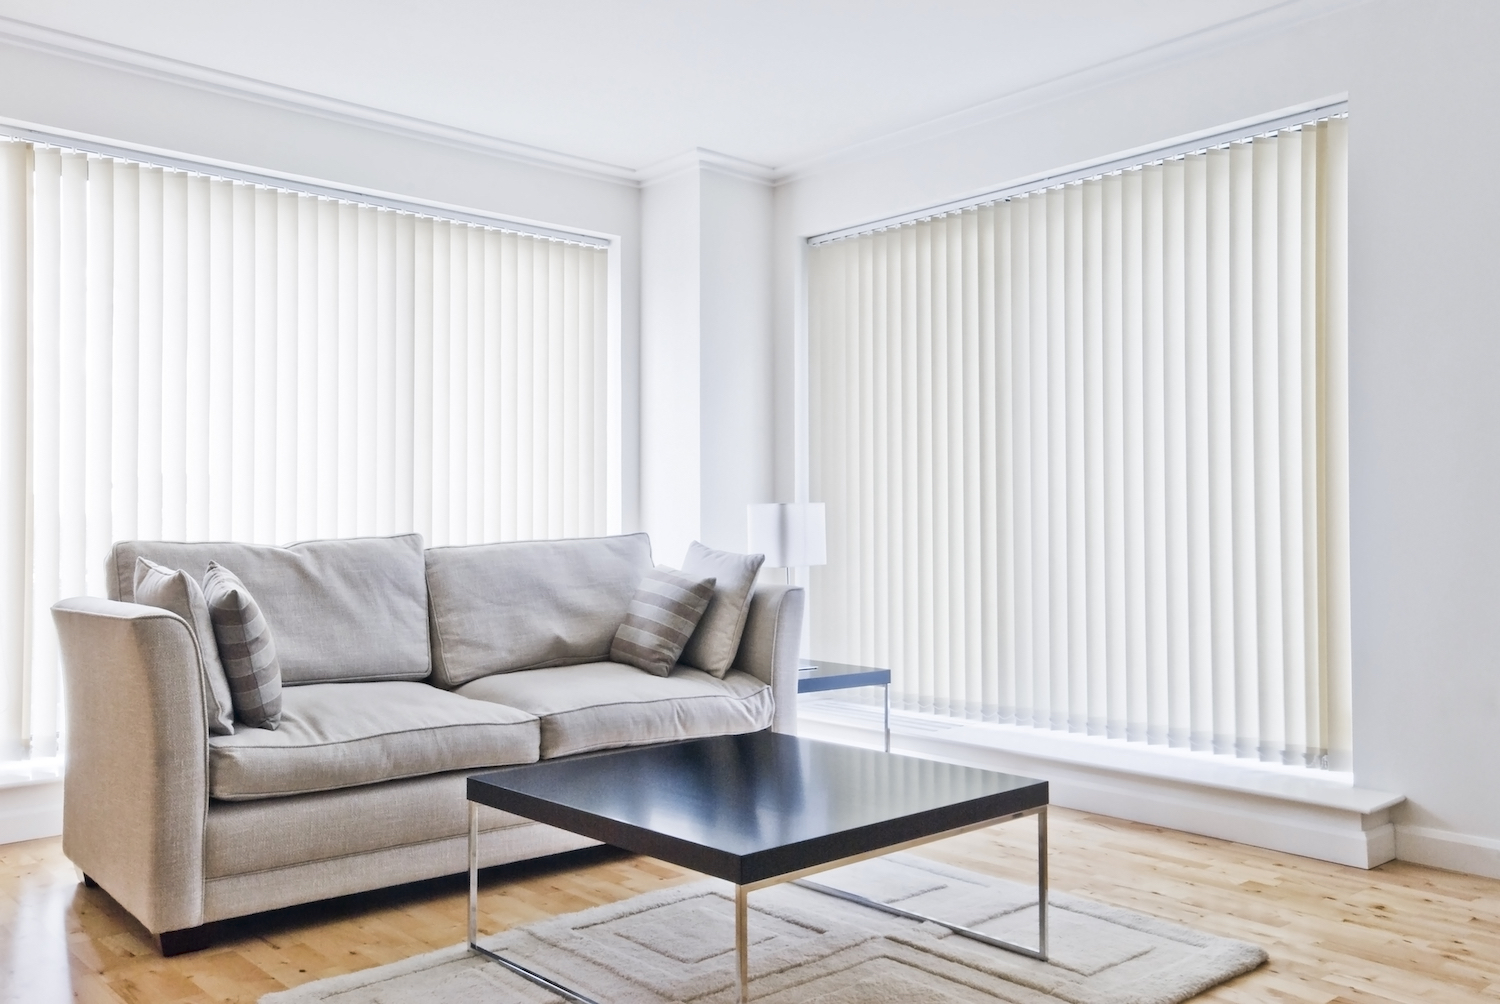 The Benefits of Custom Blinds